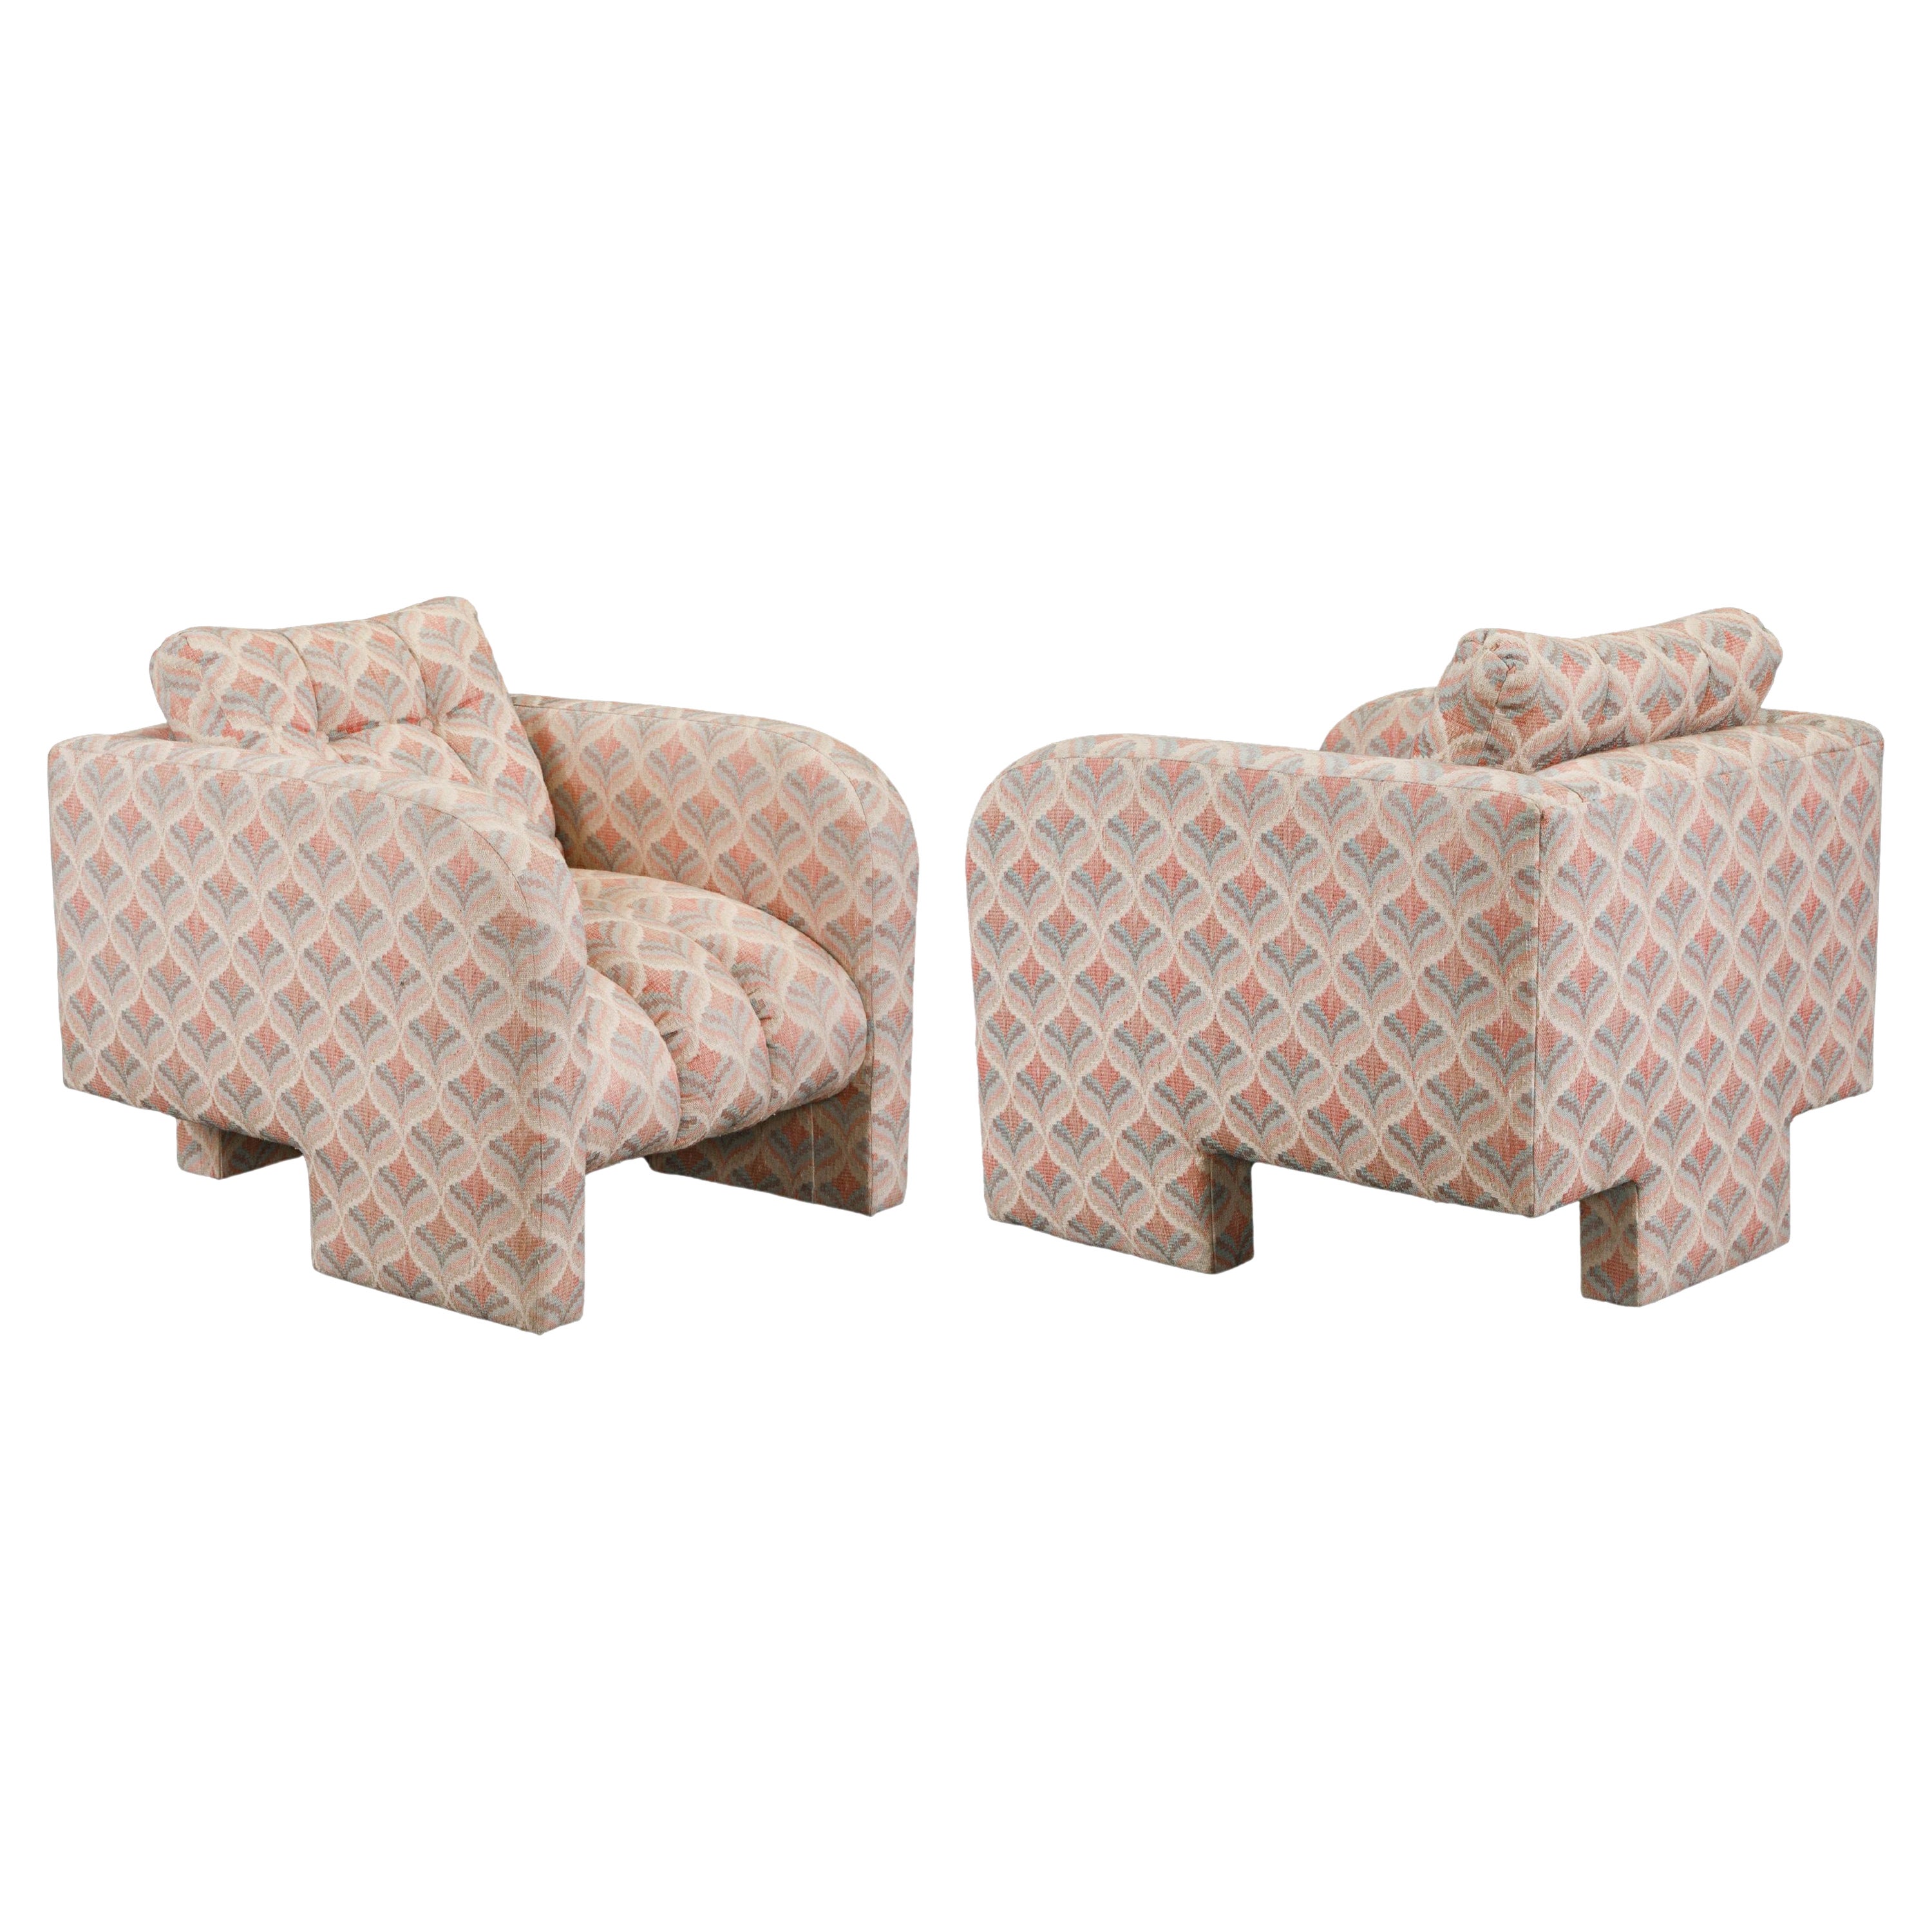 Post-Modern Channel Tufted Lounge Chairs, Attributed to Vladimir Kagan, 1980s